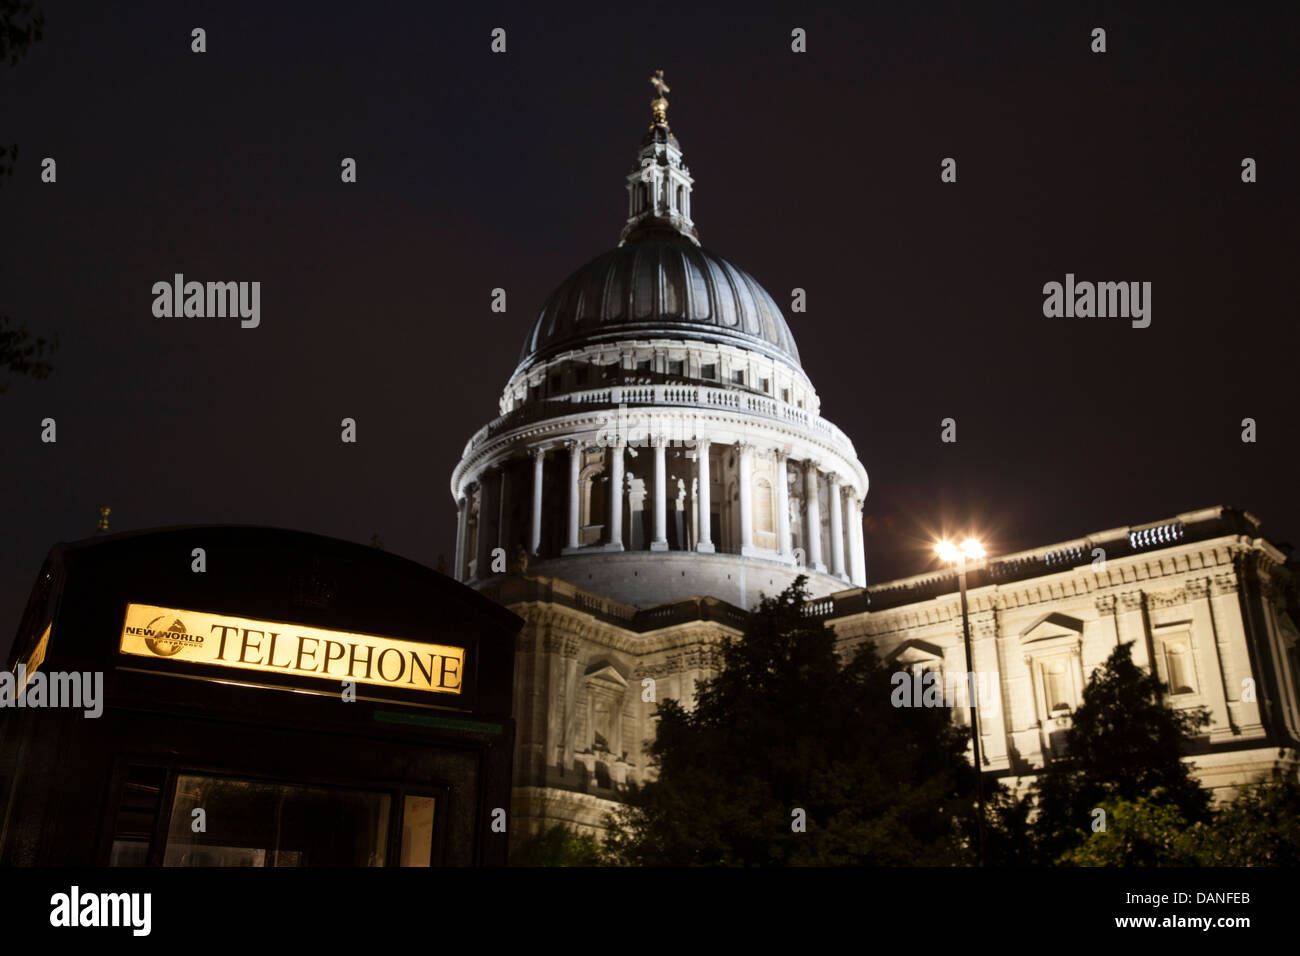 St Paul's Cathedral, London Stock Photo